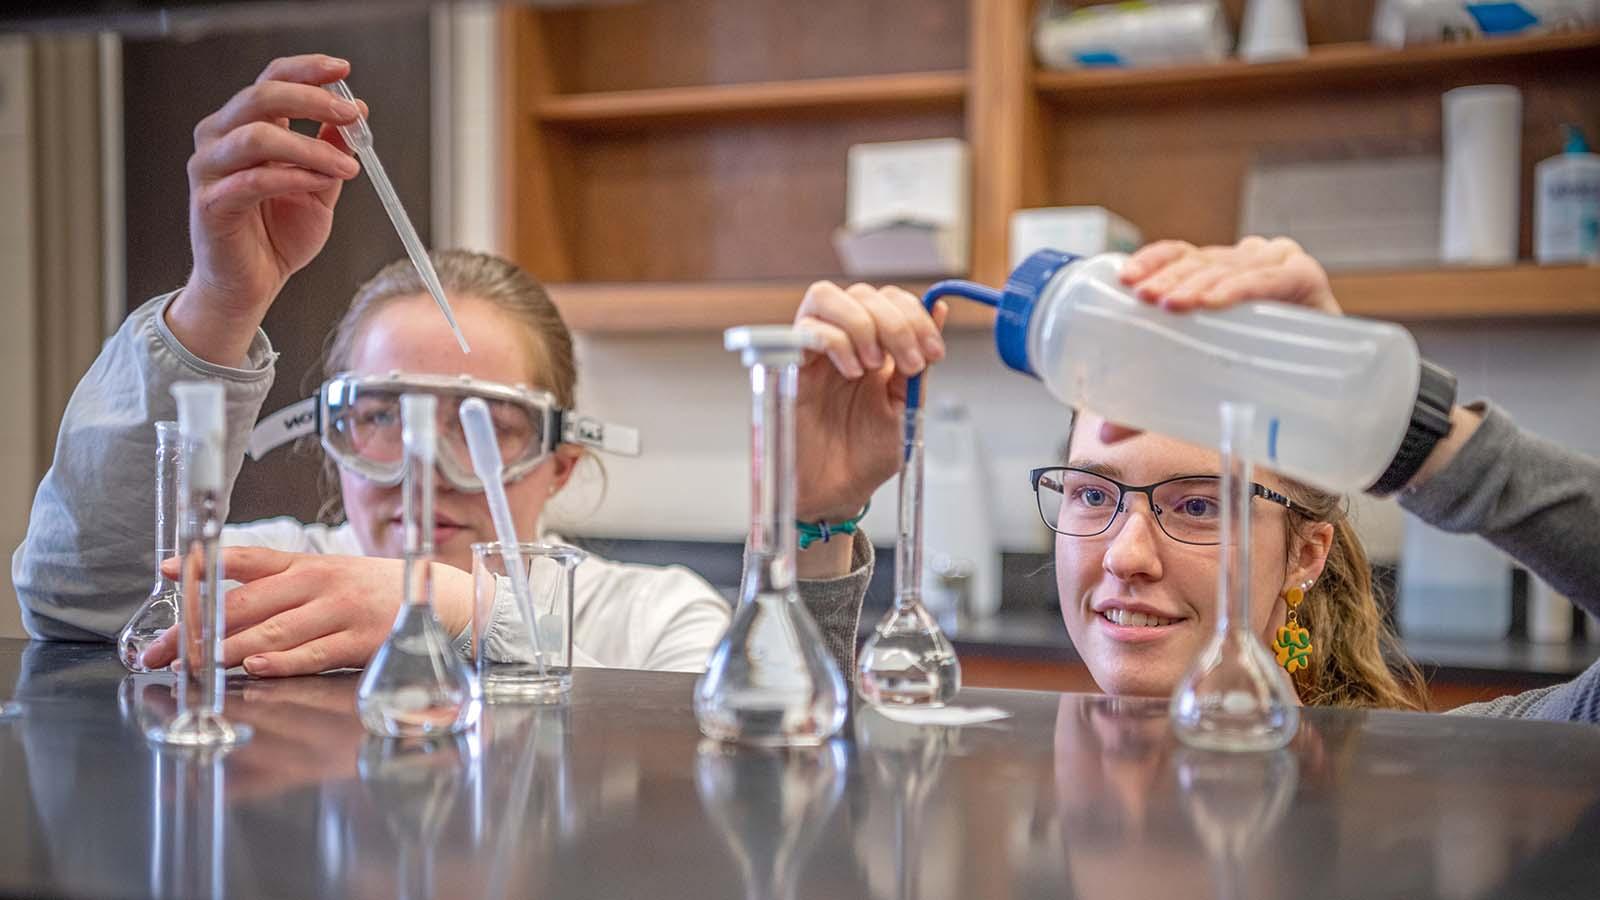 Two SURVE students adding solutions into beakers